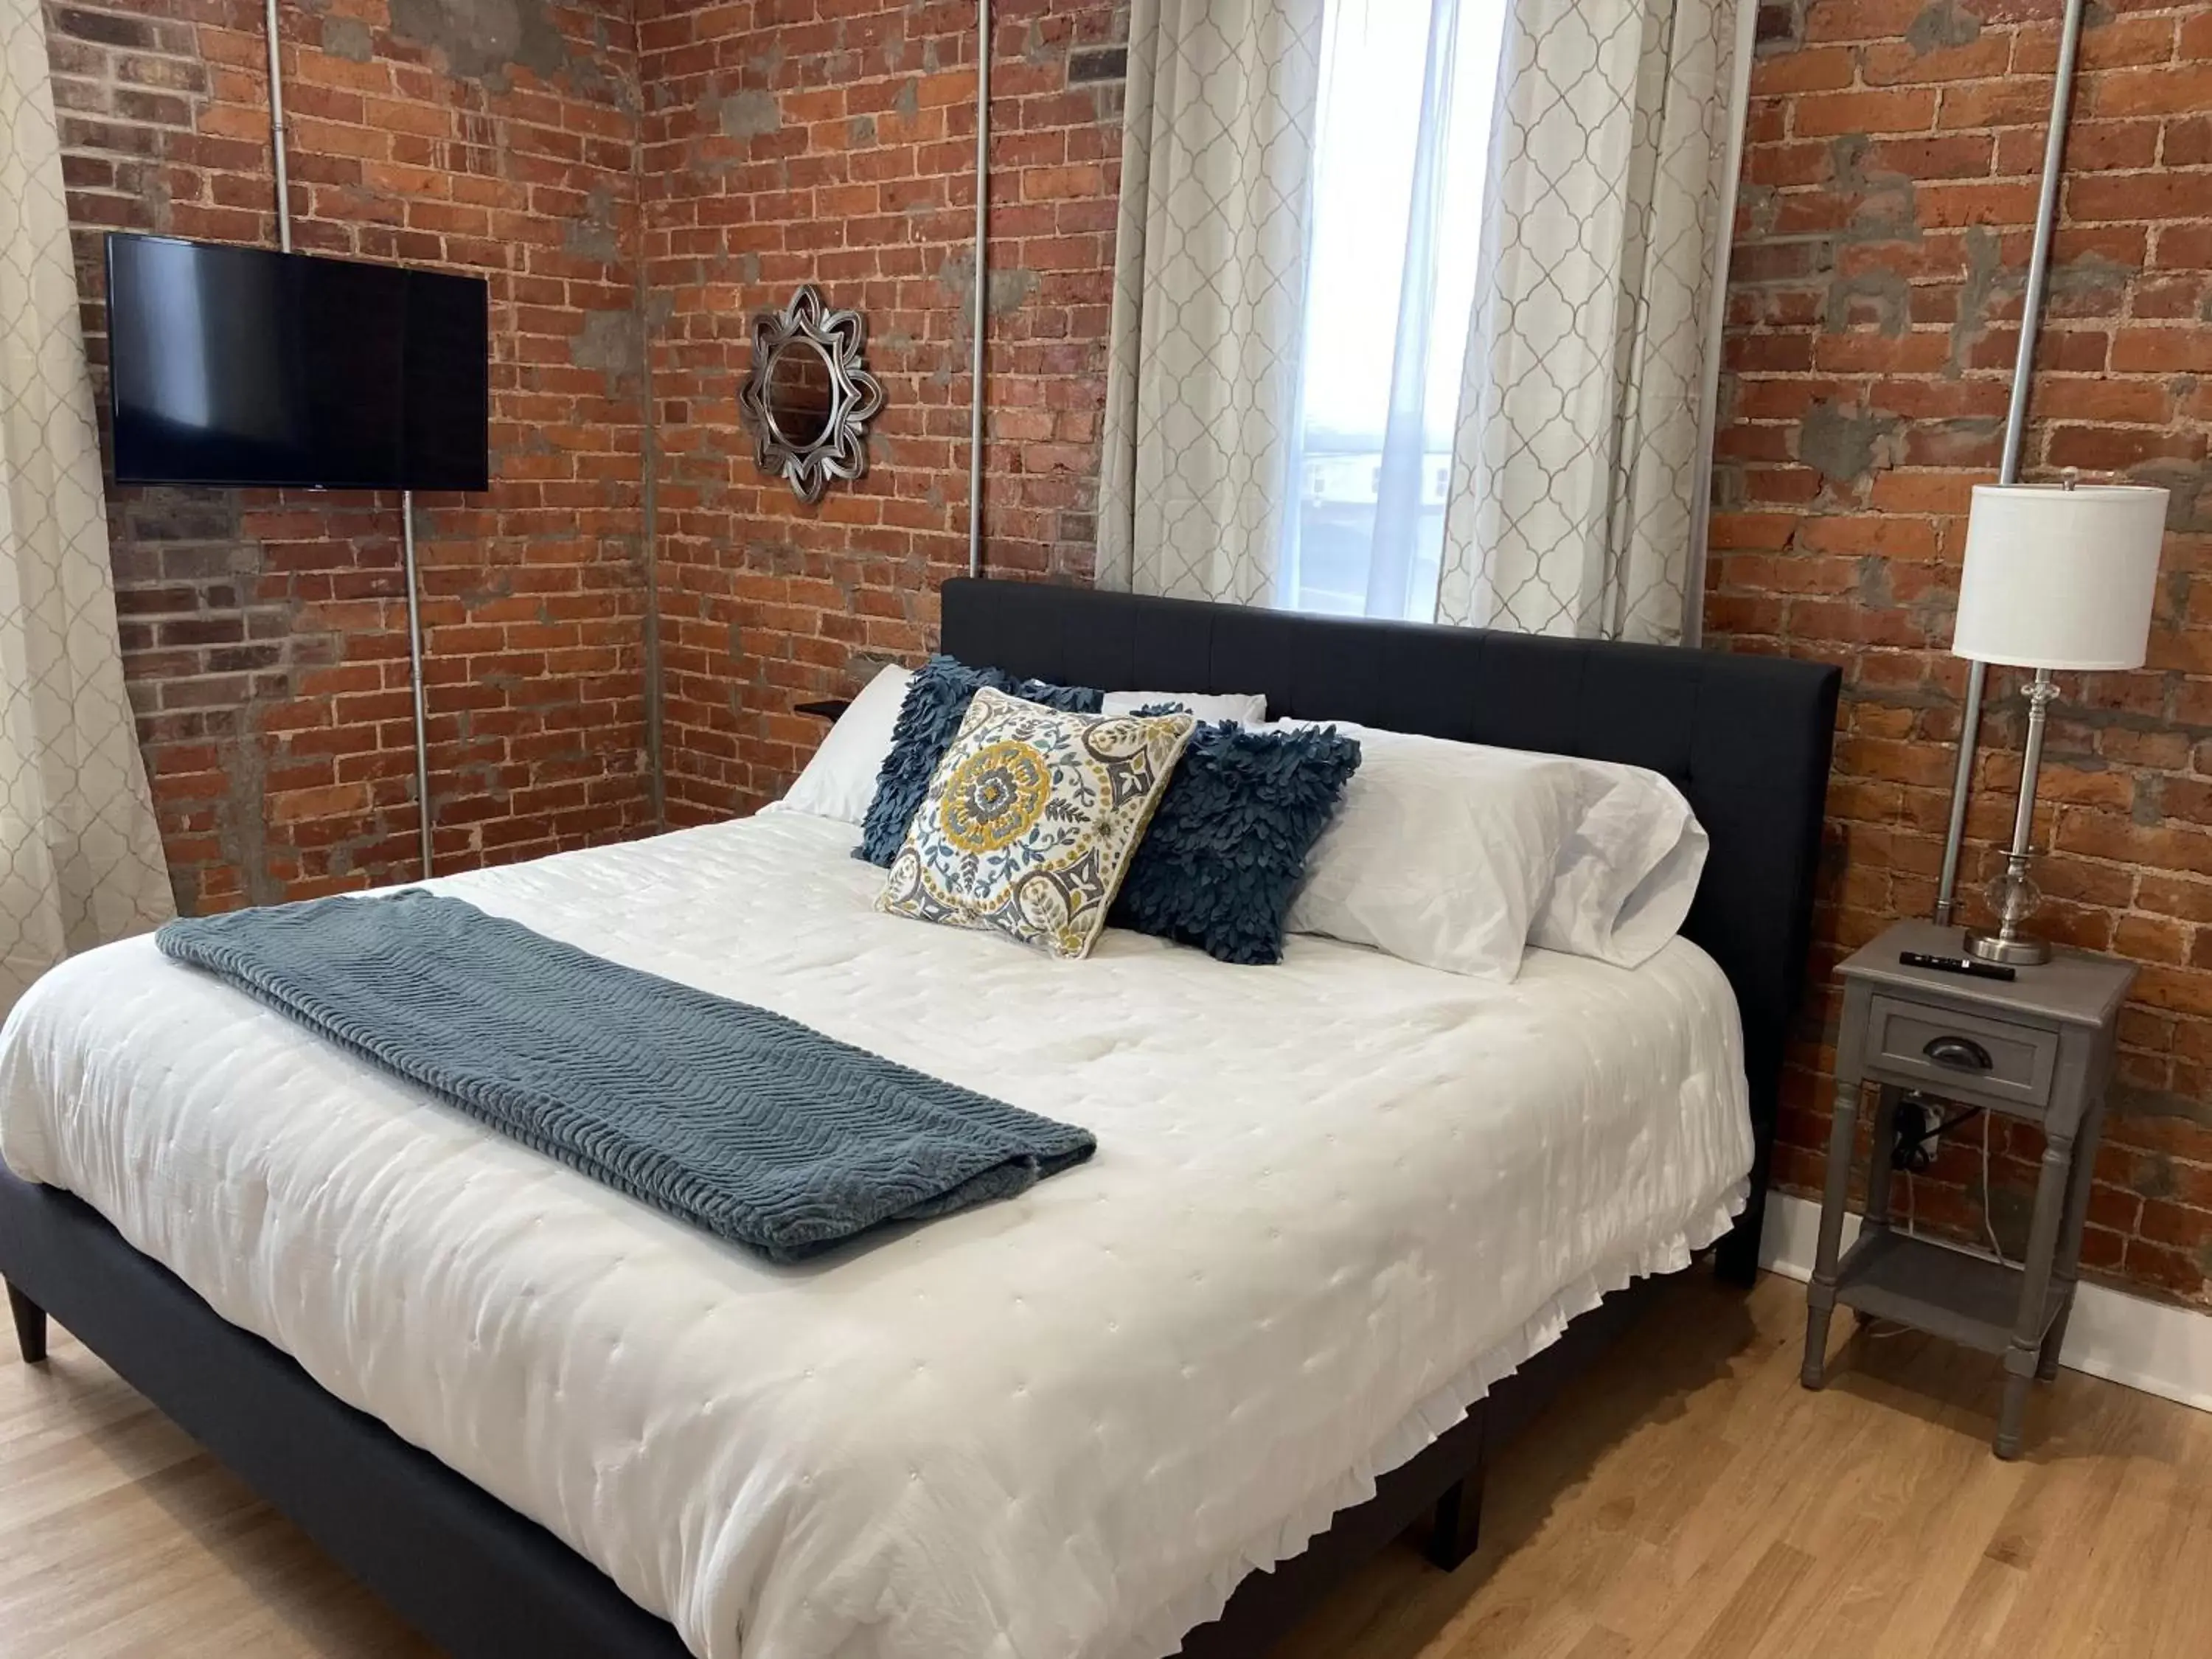 Bed in Brickhouse Loft - a boutique hotel